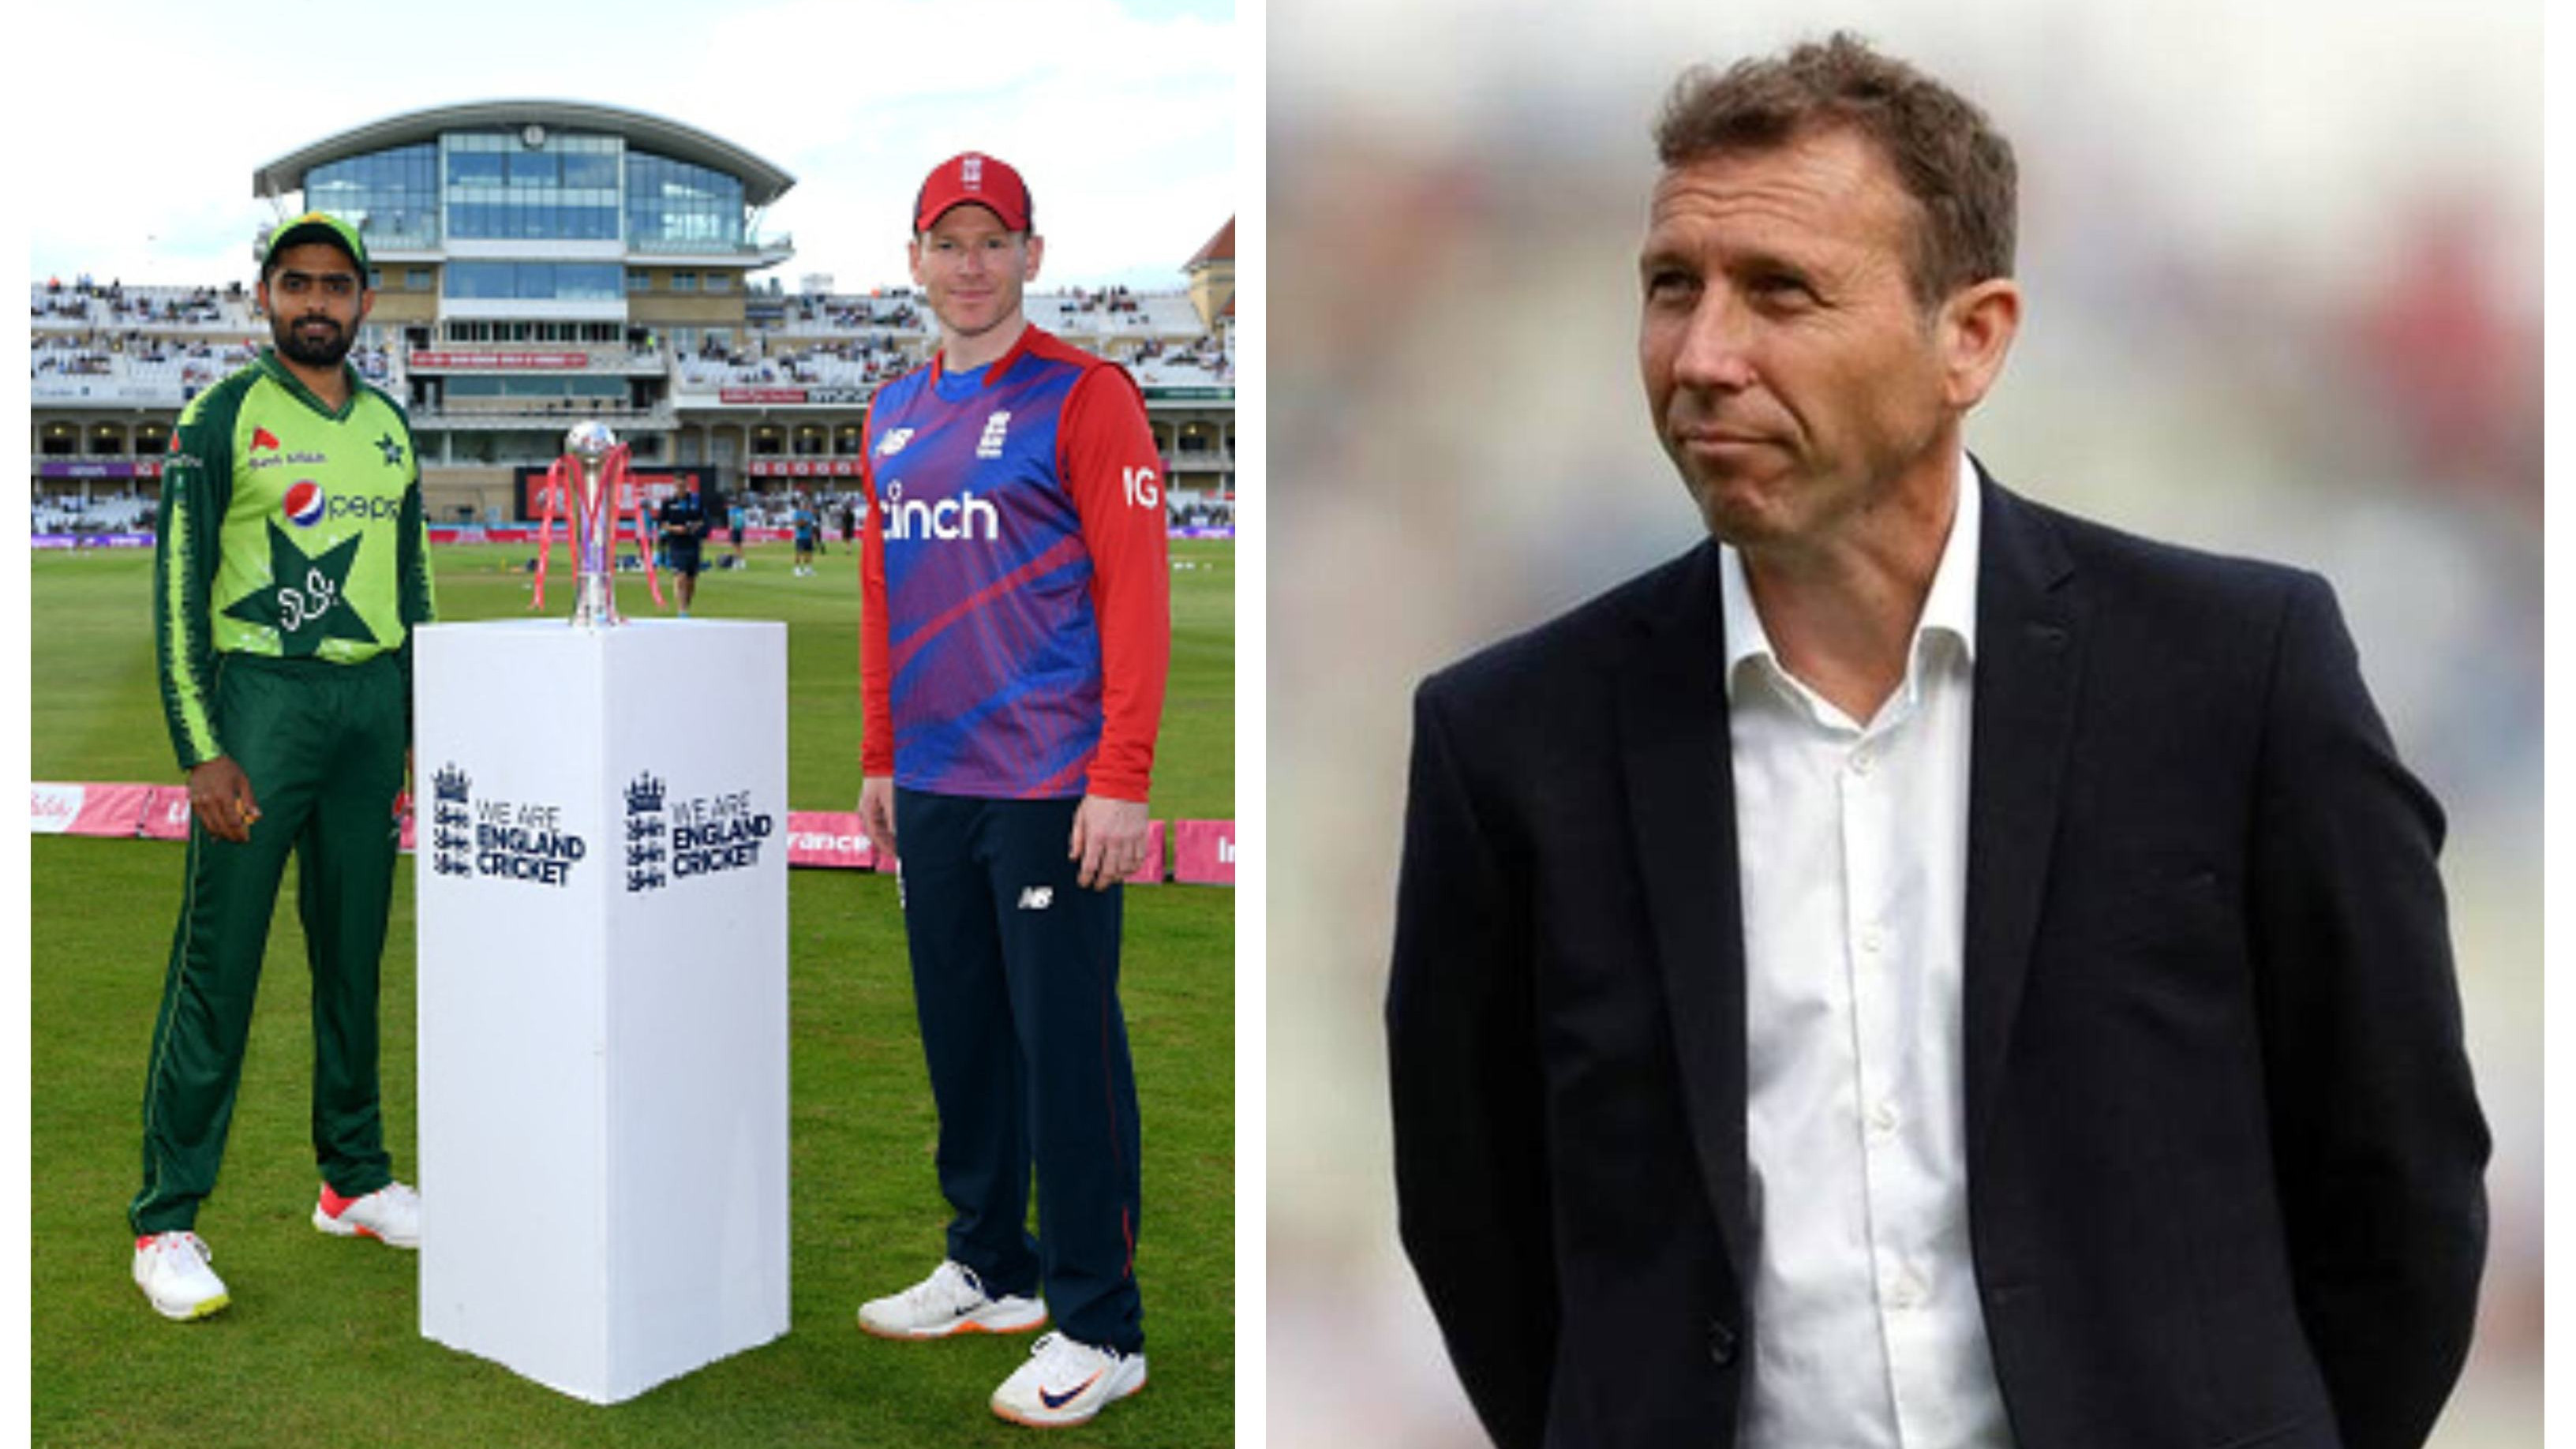 Michael Atherton hits out at ECB for maintaining silence over Pakistan tour cancellation